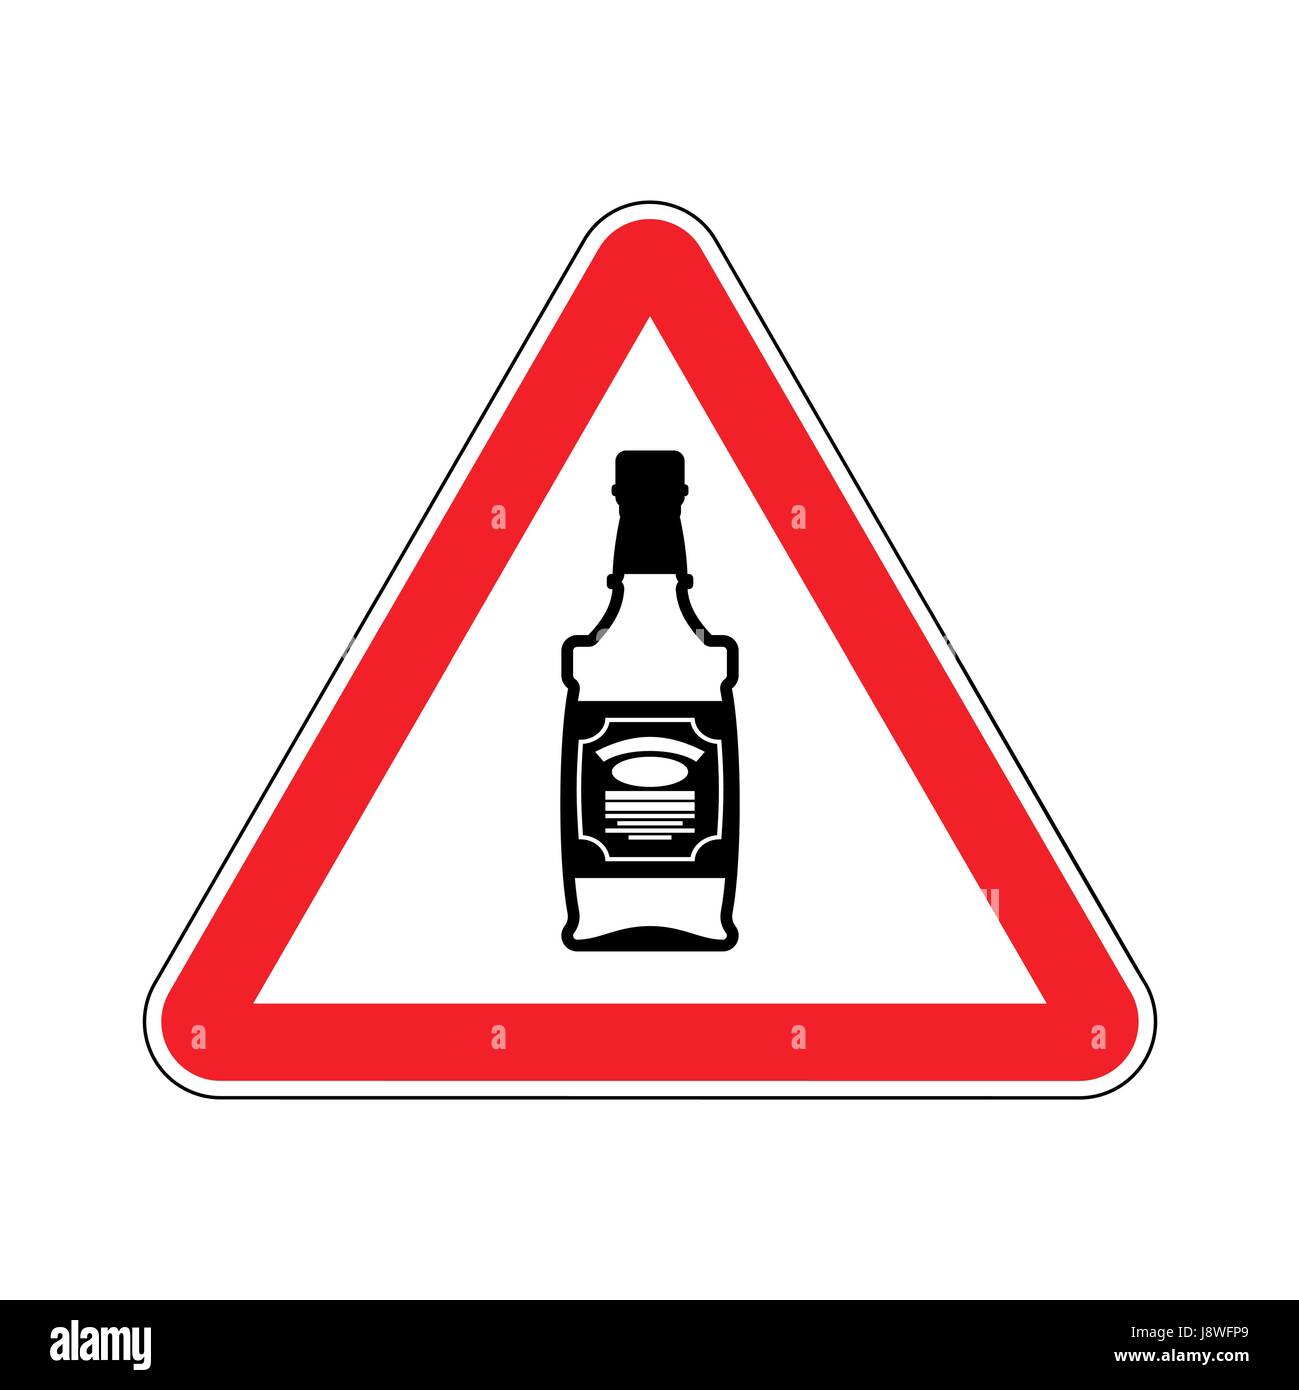 Attention alcohol. Bottle of whiskey on red triangle. Road sign Caution alcoholic Stock Vector